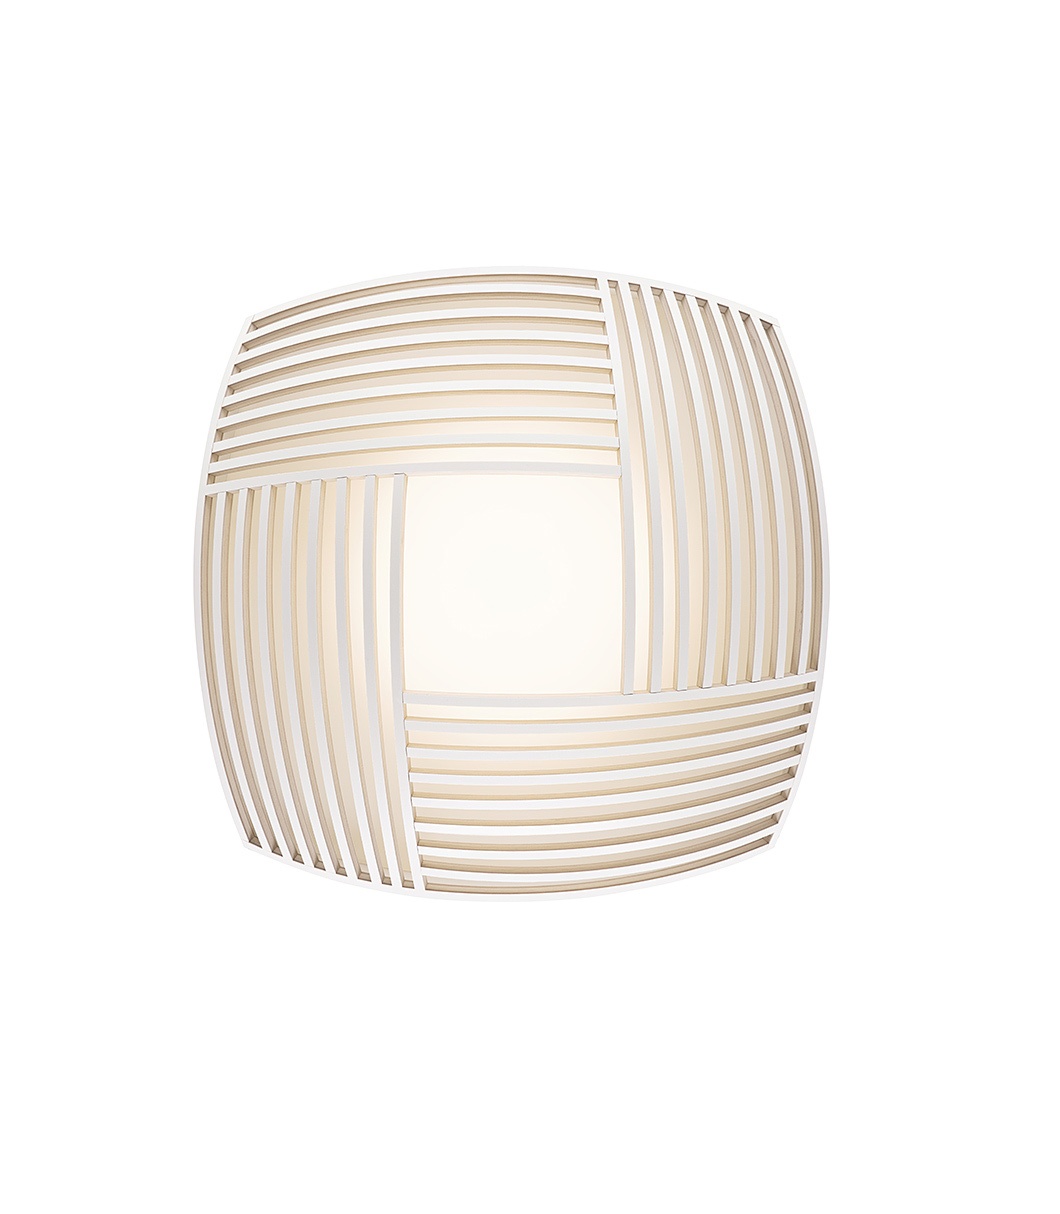 Kuulto 9100 ceiling lamp is available in white laminated